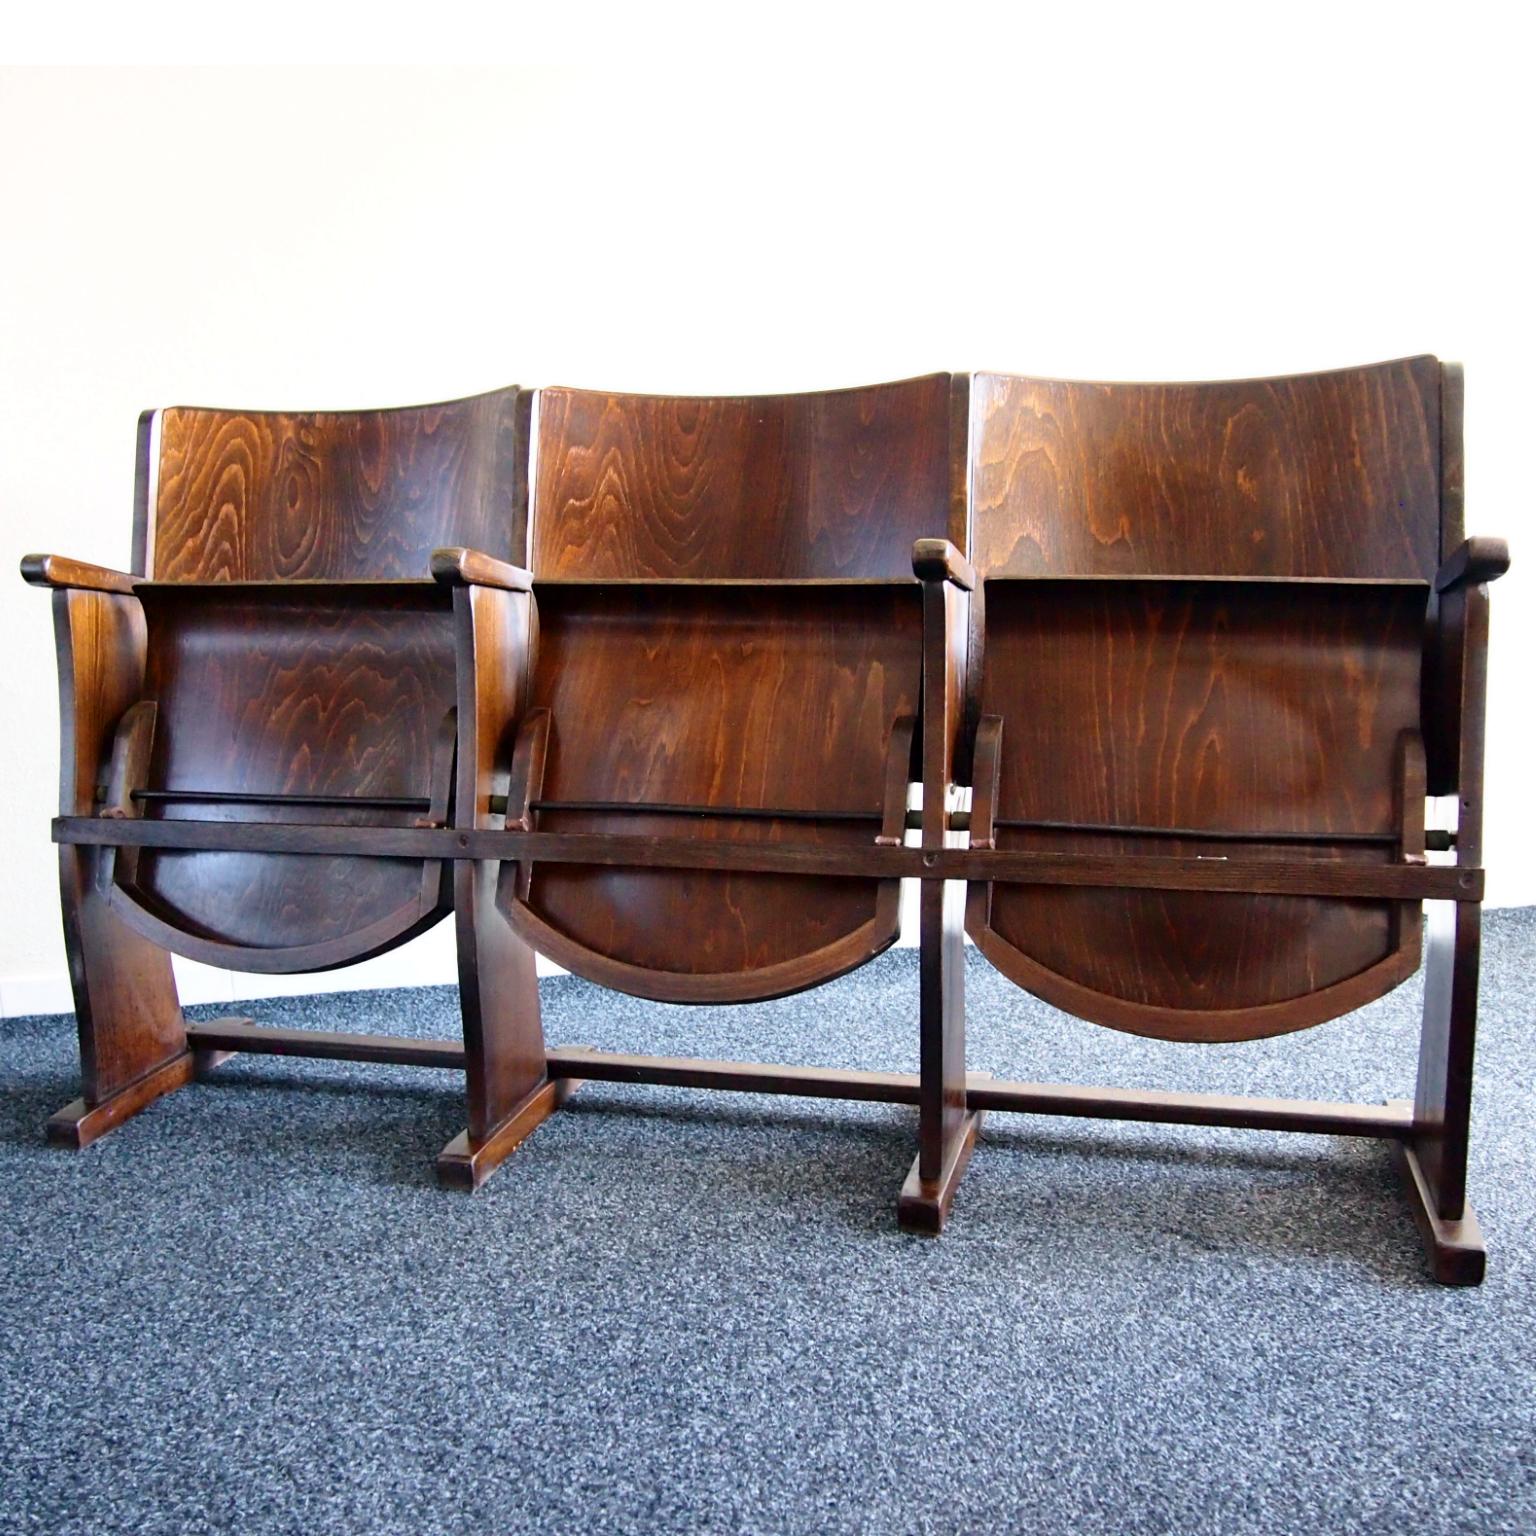 Row of three cinema seats originally from the cinema in Czechoslovakia produced by Thonet. Nowadays it can be a stunning addition to any interior. Very good, original condition with signs of age what is giving it the originality.